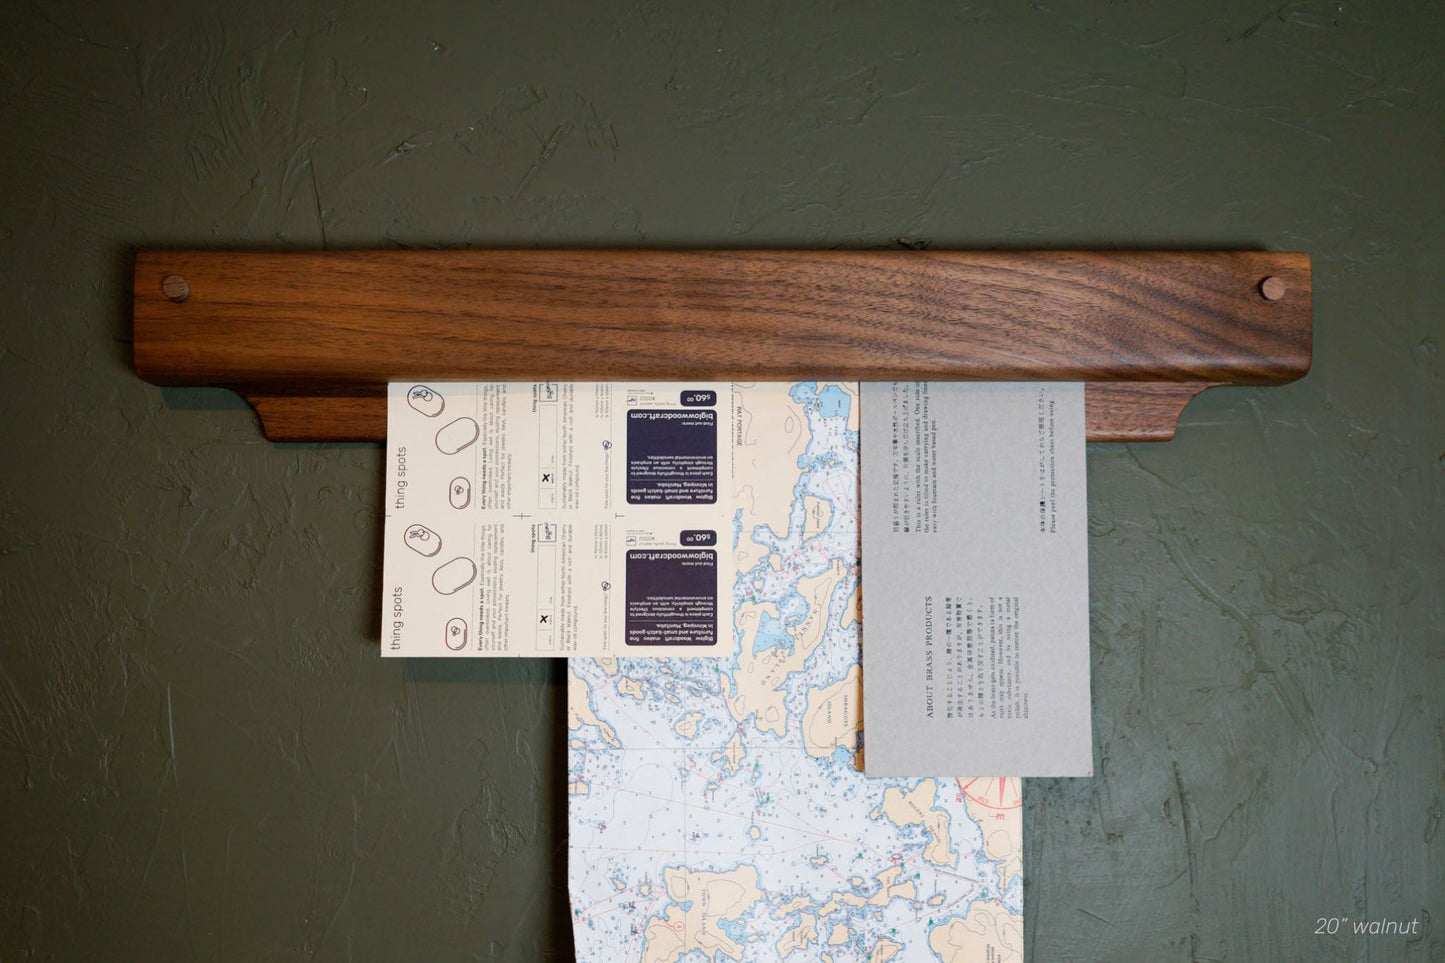 The Gravity Bar, by Biglow Woodcraft; a wooden holder for papers, pictures and images. A wooden bar installed on a green wall, holding documents. Hardwood Walnut